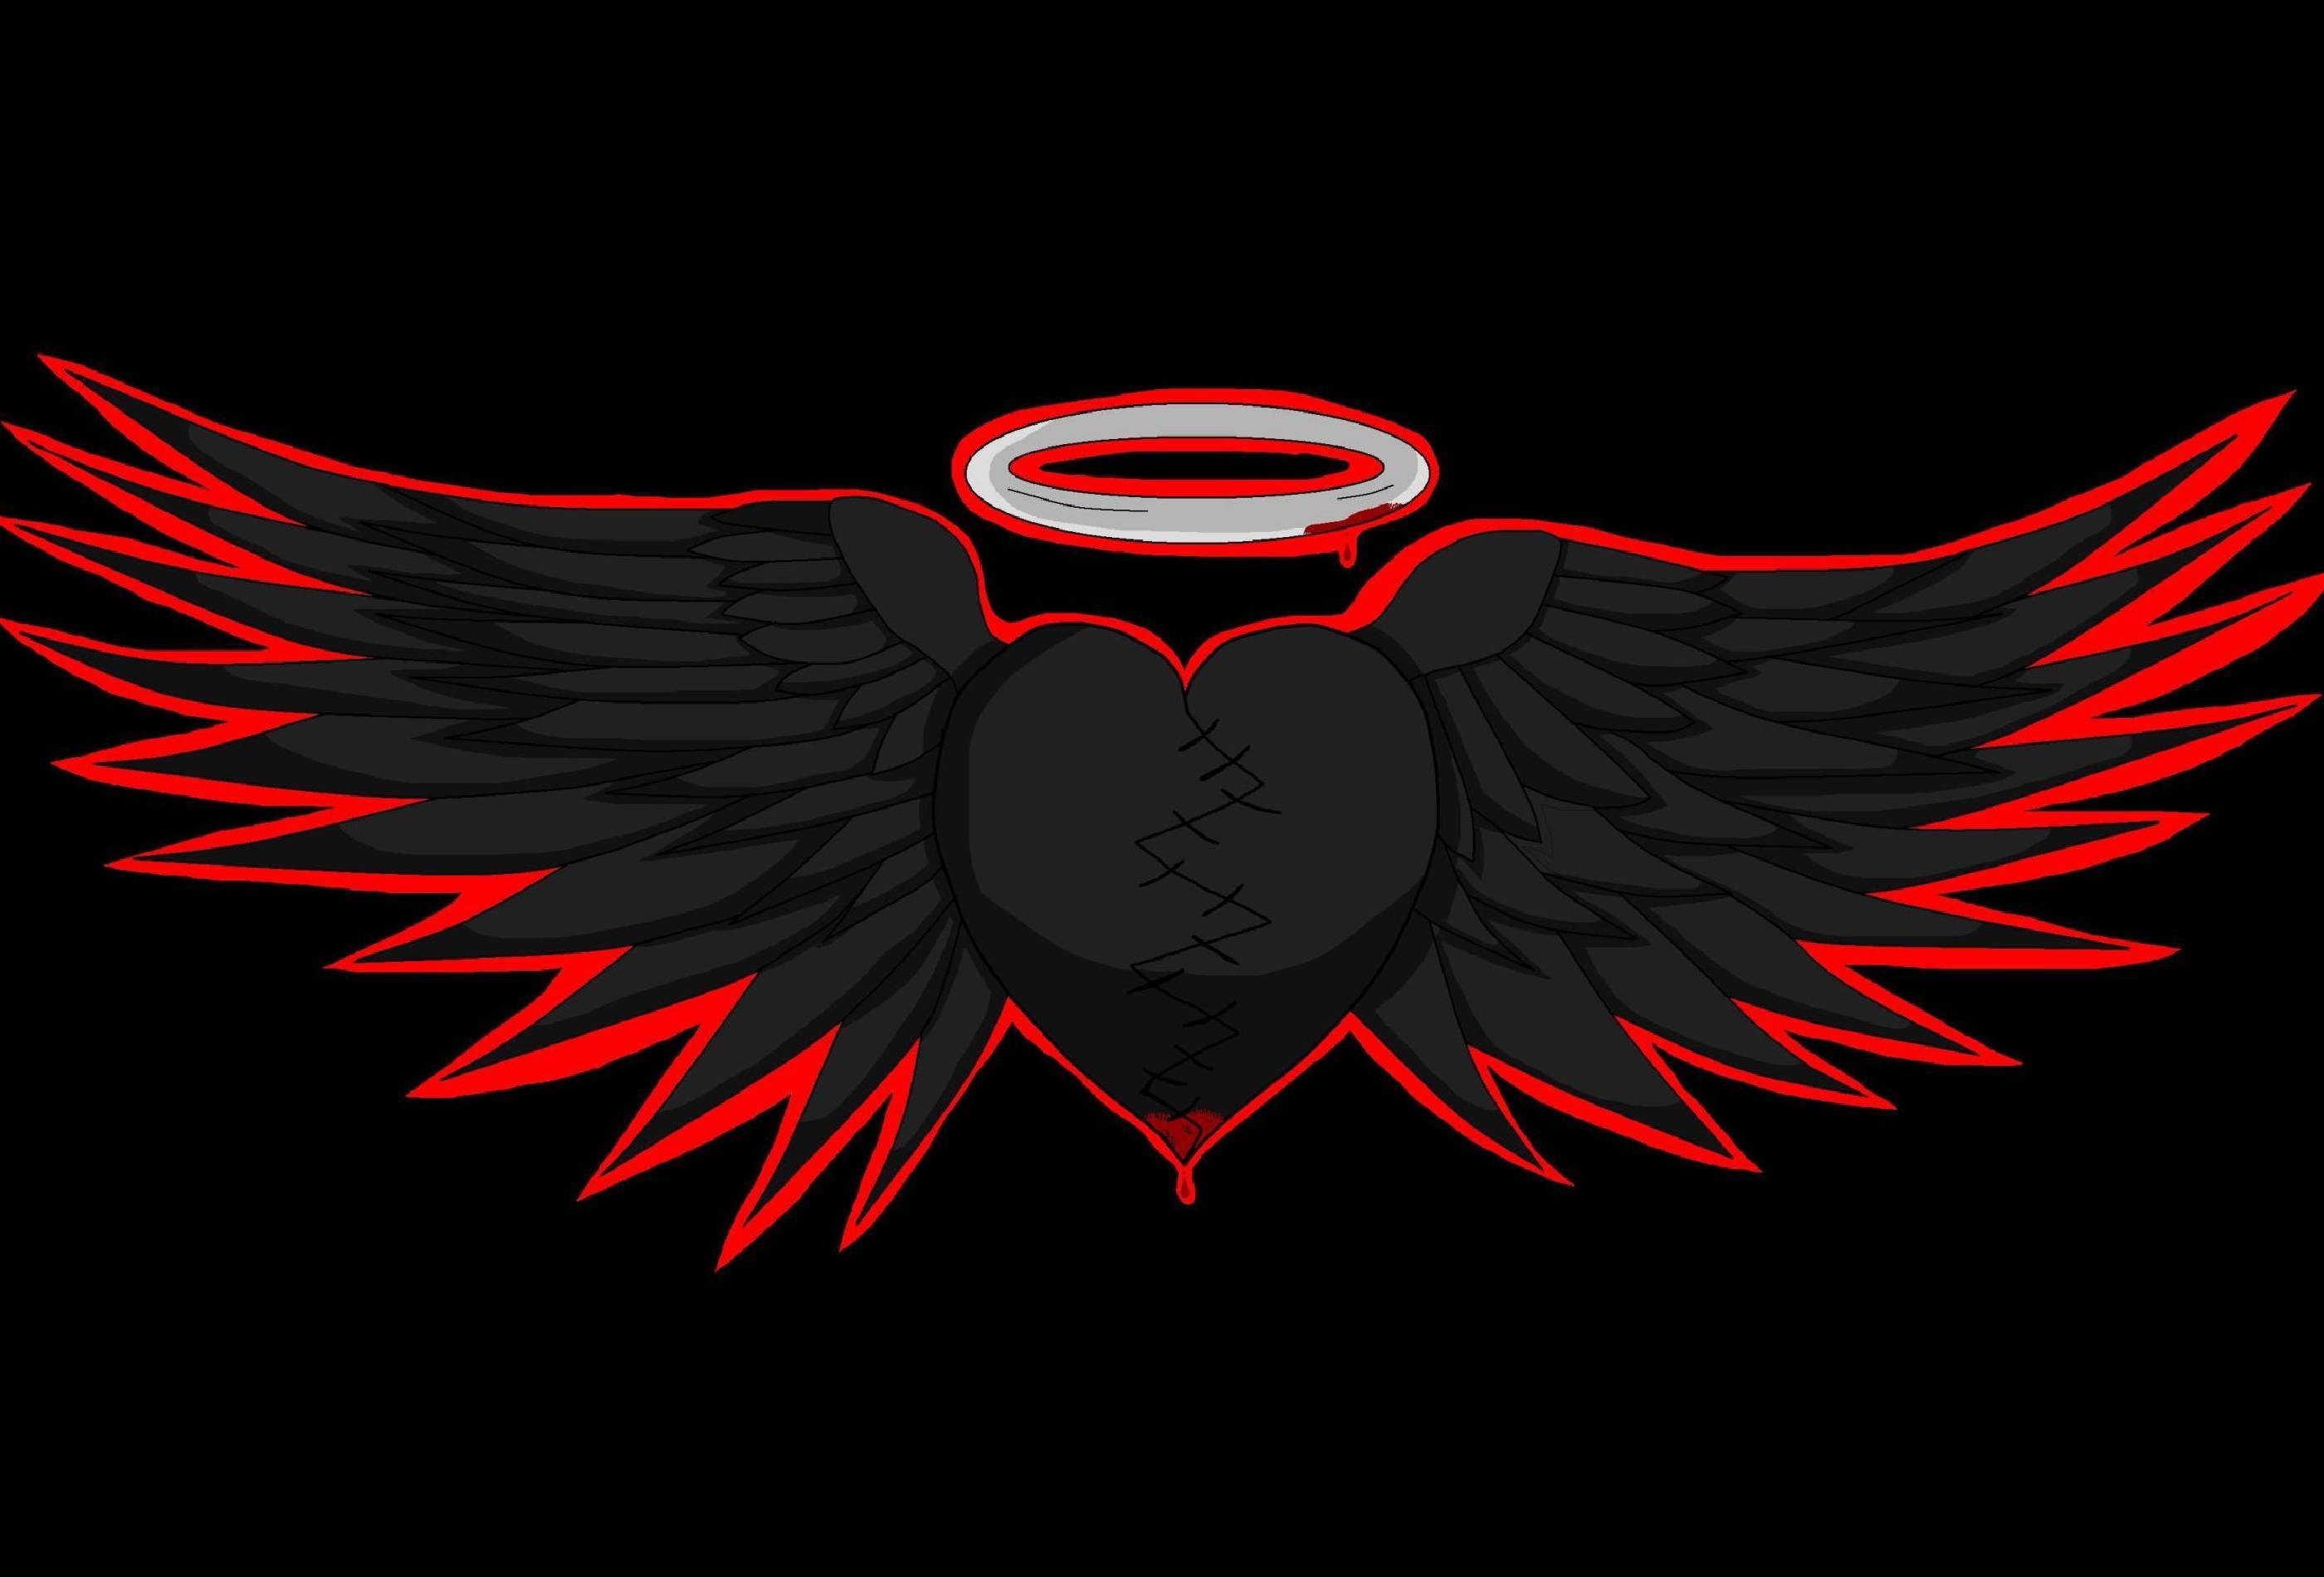 Black Hearted Angel Wings Wallpaper Data Src Red Image HD Download